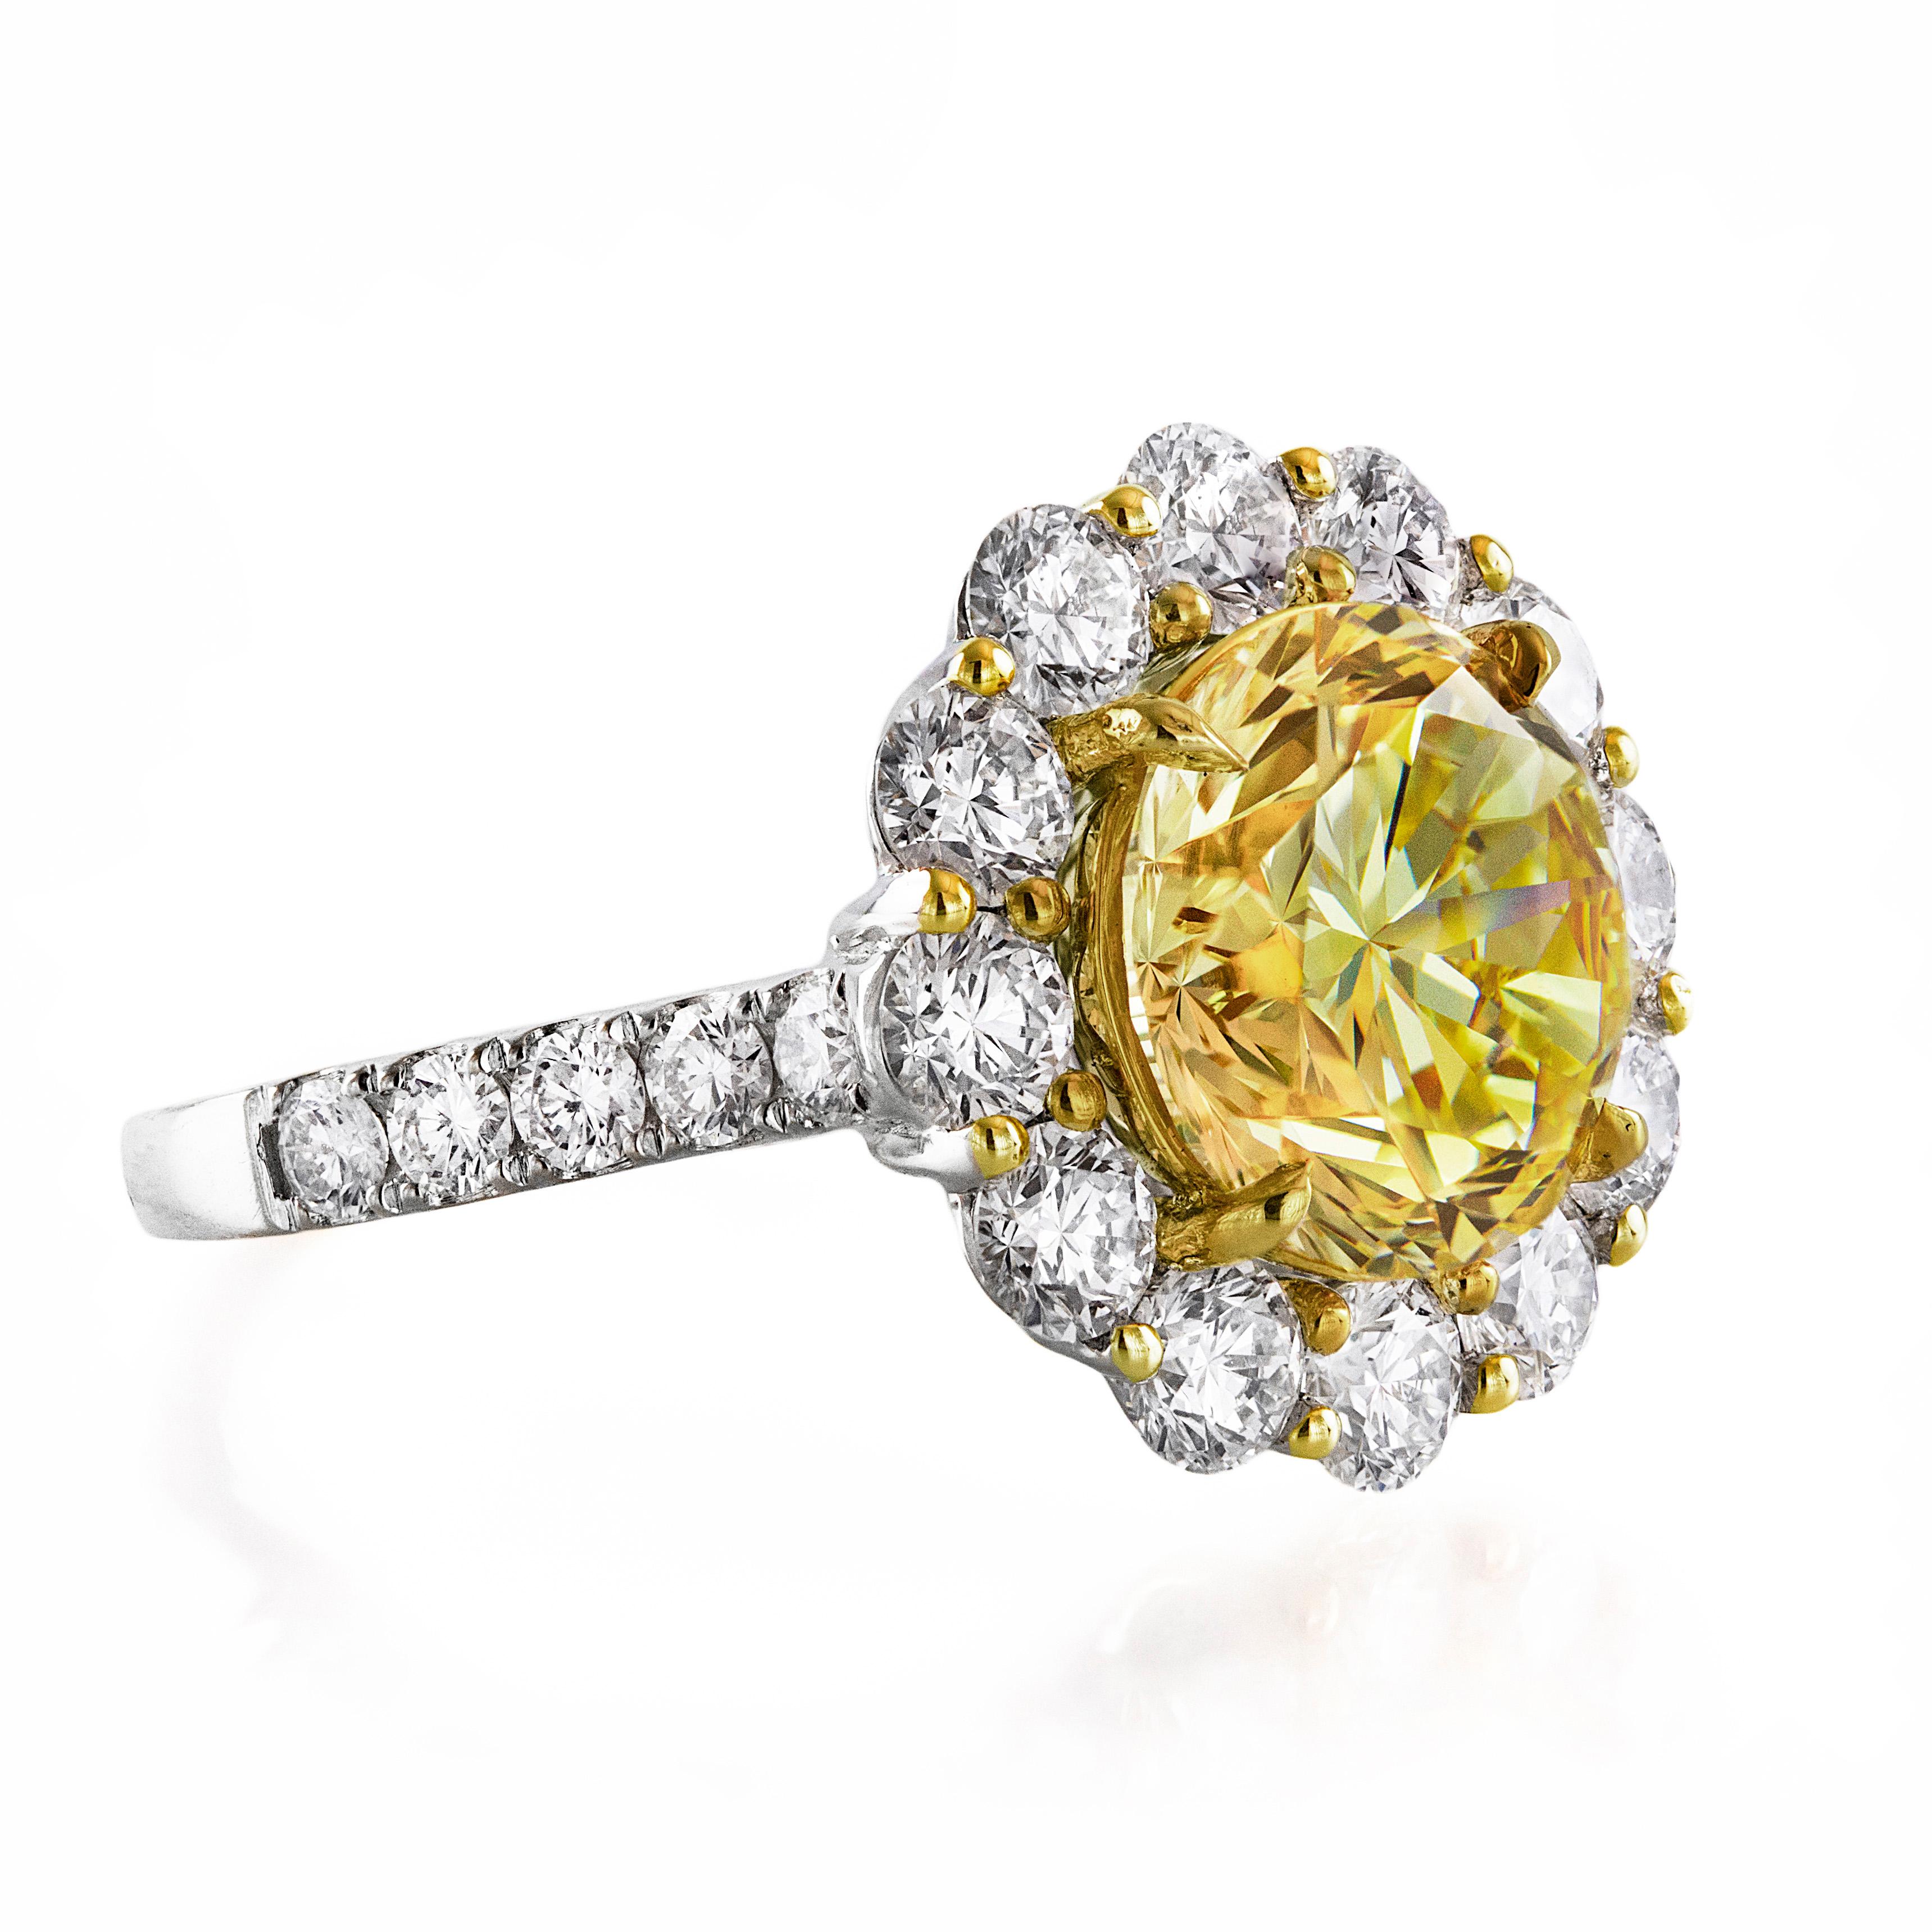 This magnificent and rare high end jewelry showcasing, 4.47 carat brilliant round cut diamonds certified by GIA as Fancy Intense Yellow color and VVS2 clarity. The color of this intense yellow diamond is very strong and in real life appears to be